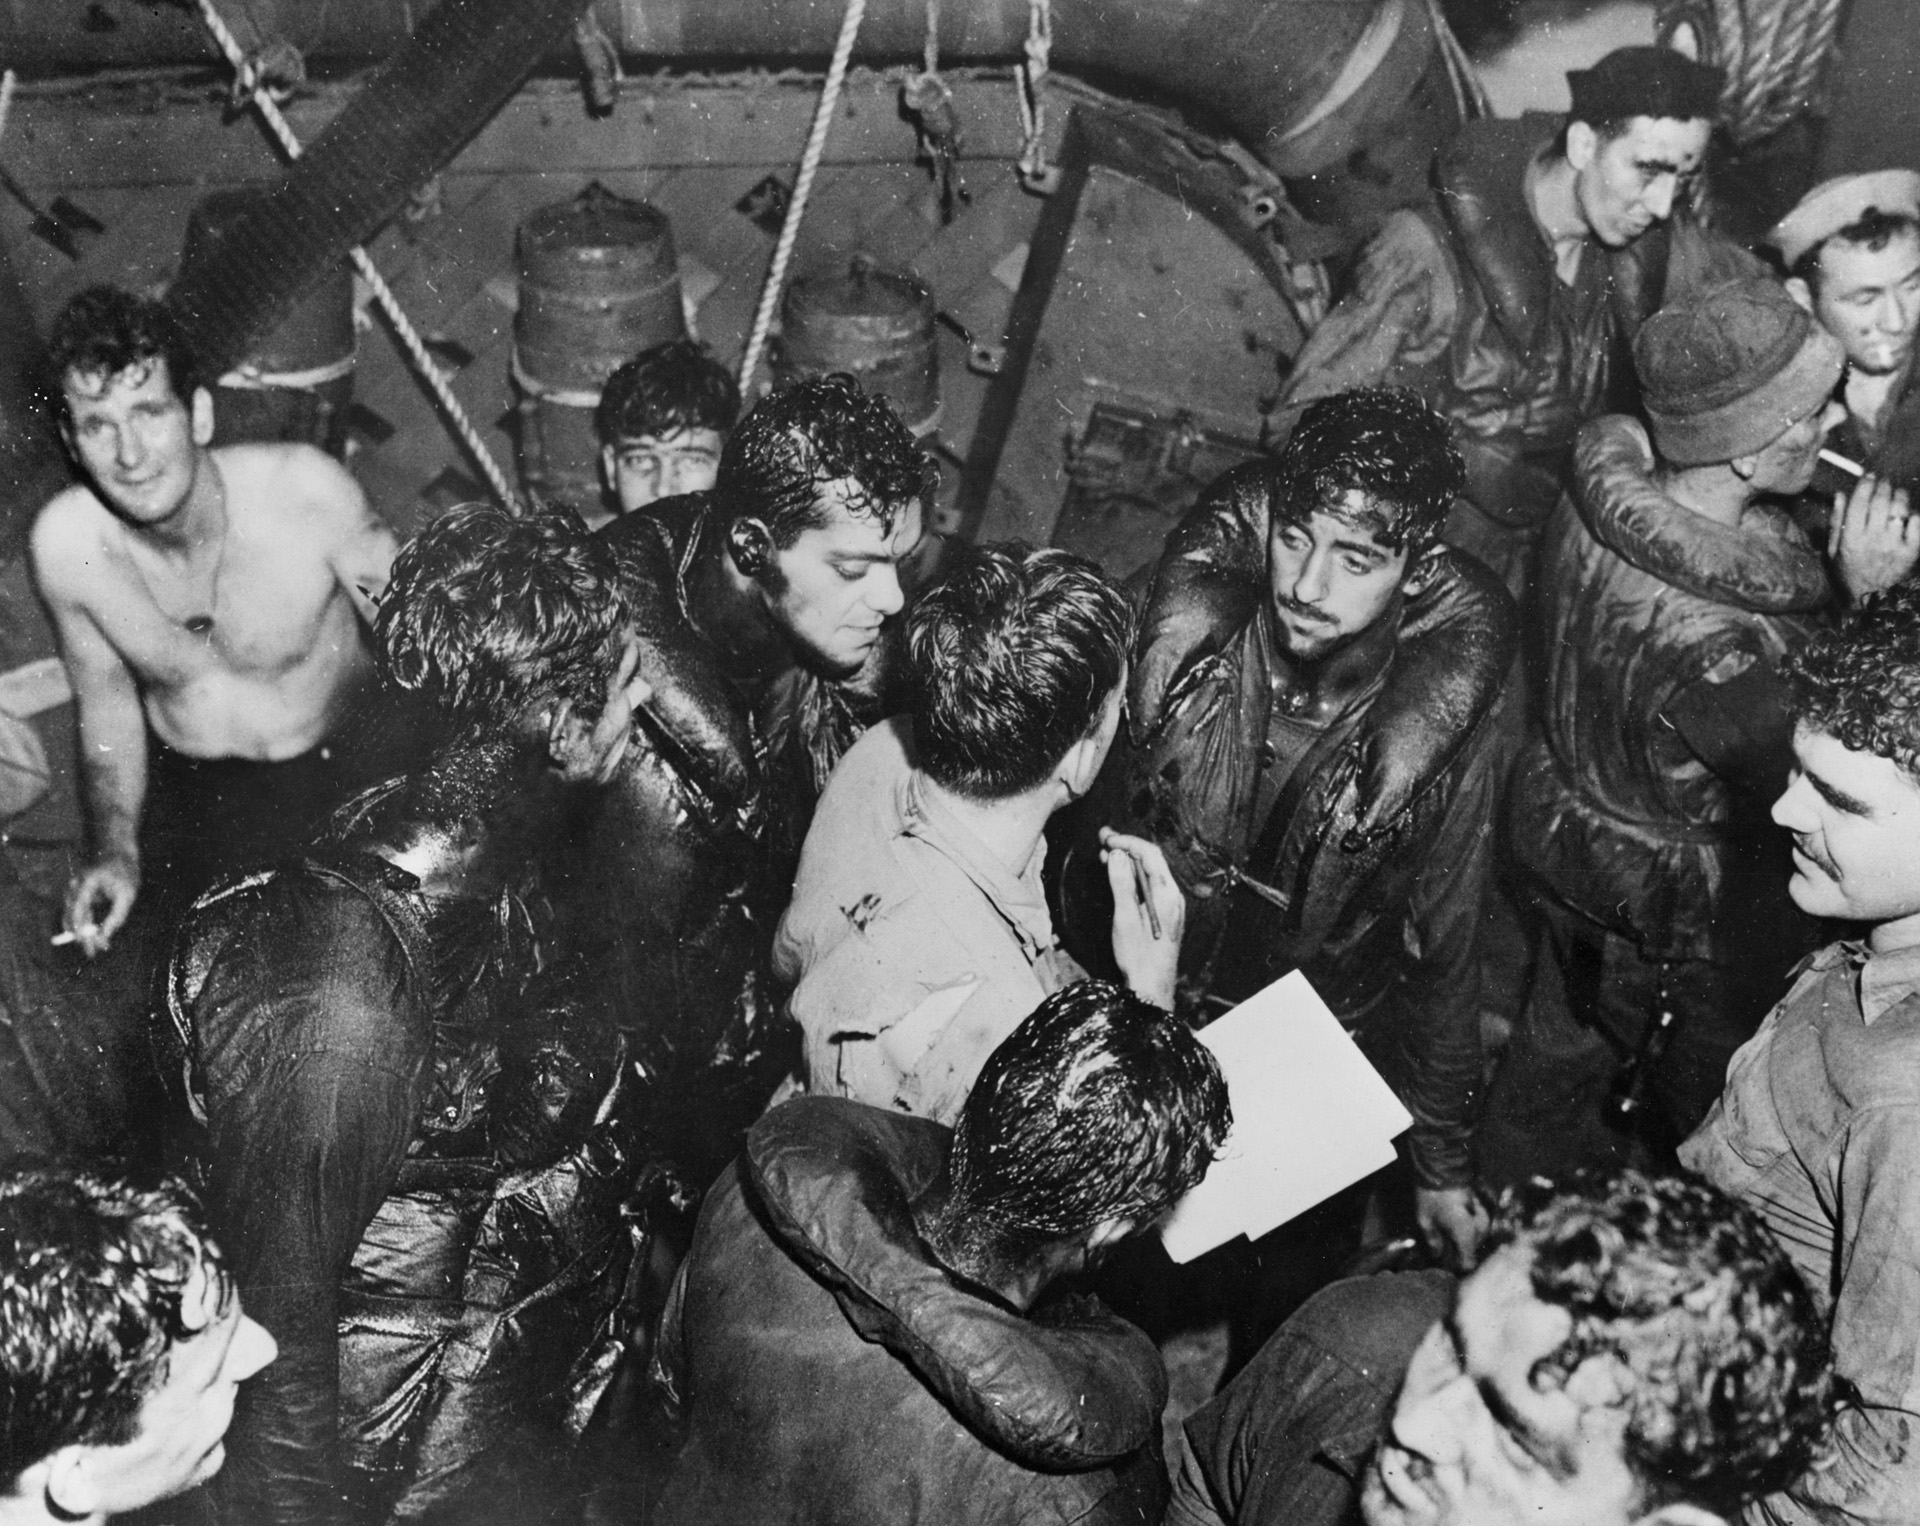 Oil-covered survivors of the torpedoed USS Helena are taken aboard USS Nicholas after the Battle of Kula Gulf, July 5, 1943. Gwin returned to the scene of the battle the next day and rescued 87 more sailors before Helena sank.